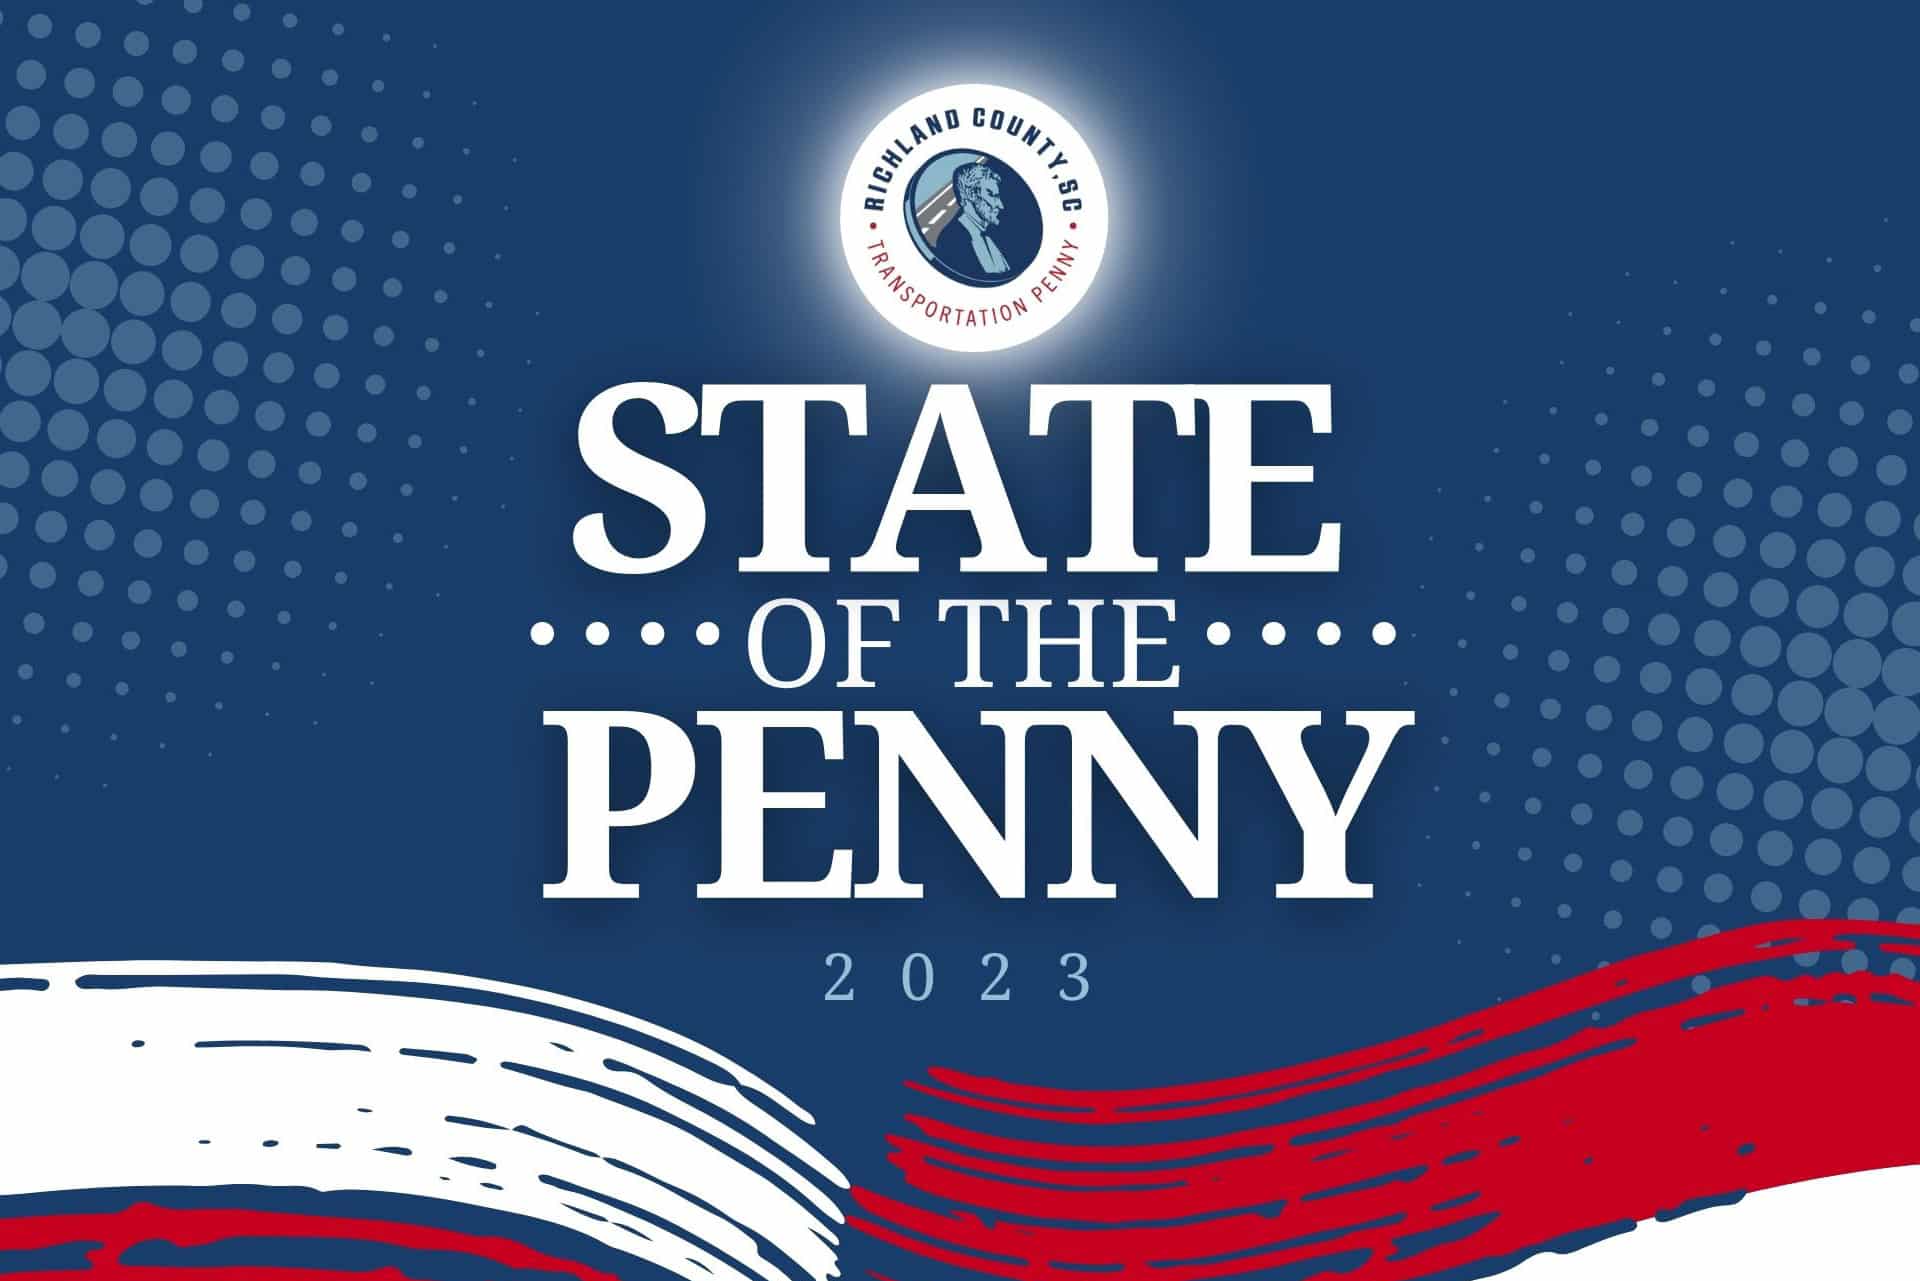 State of the Penny Presentation - 1